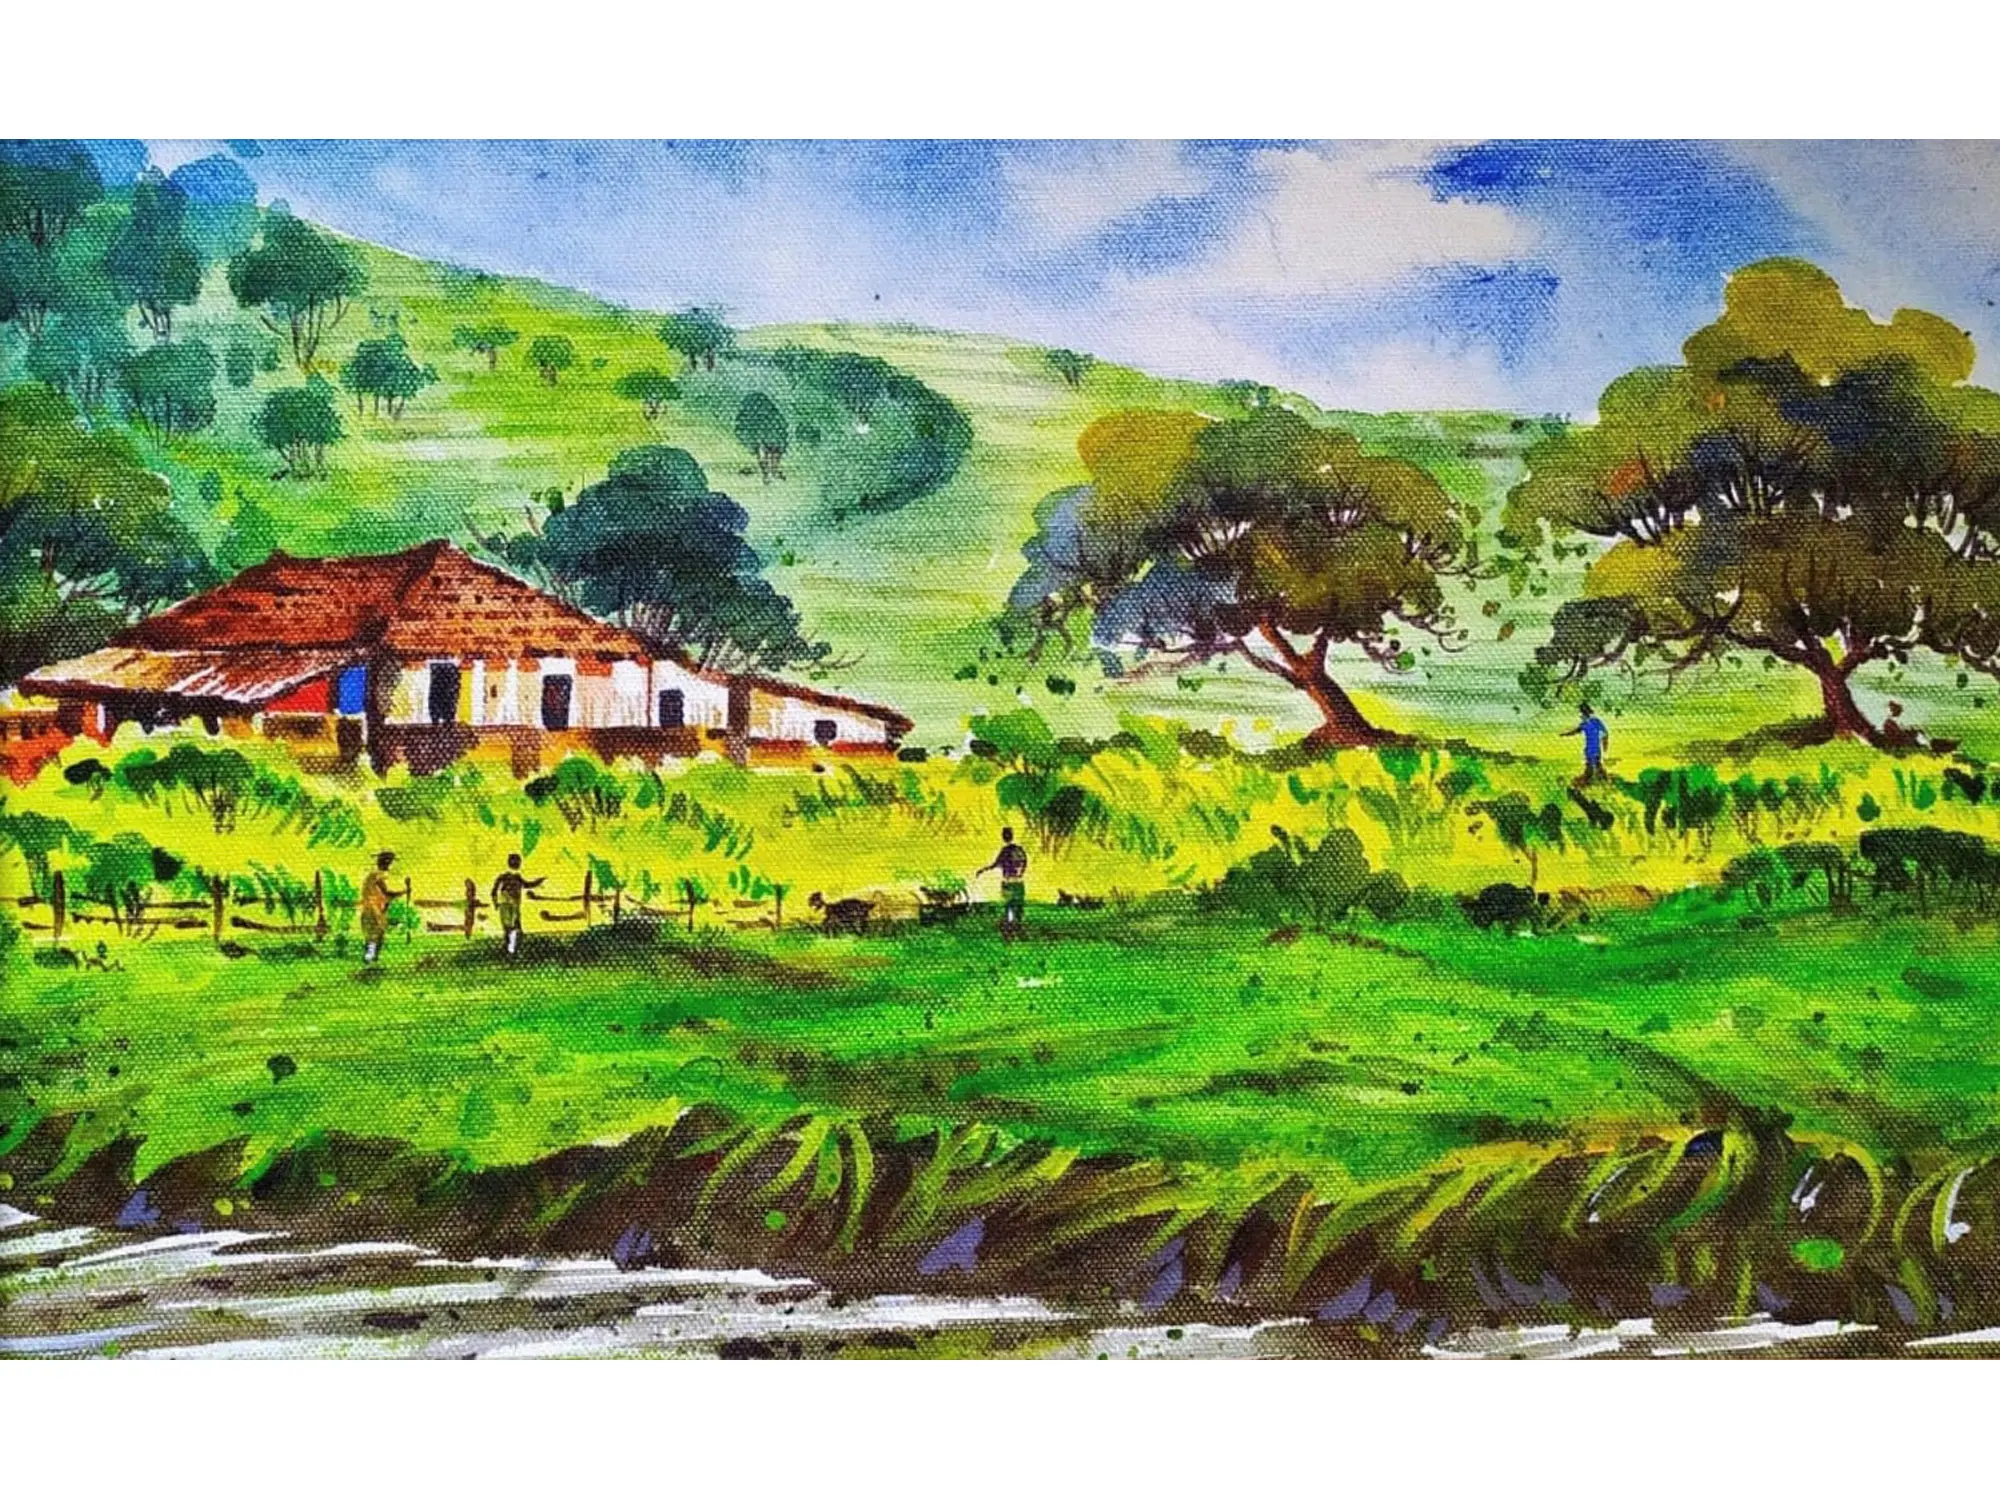 How to draw easy scenery drawing with oil pastel landscape village scenery  | village house drawing - YouTube